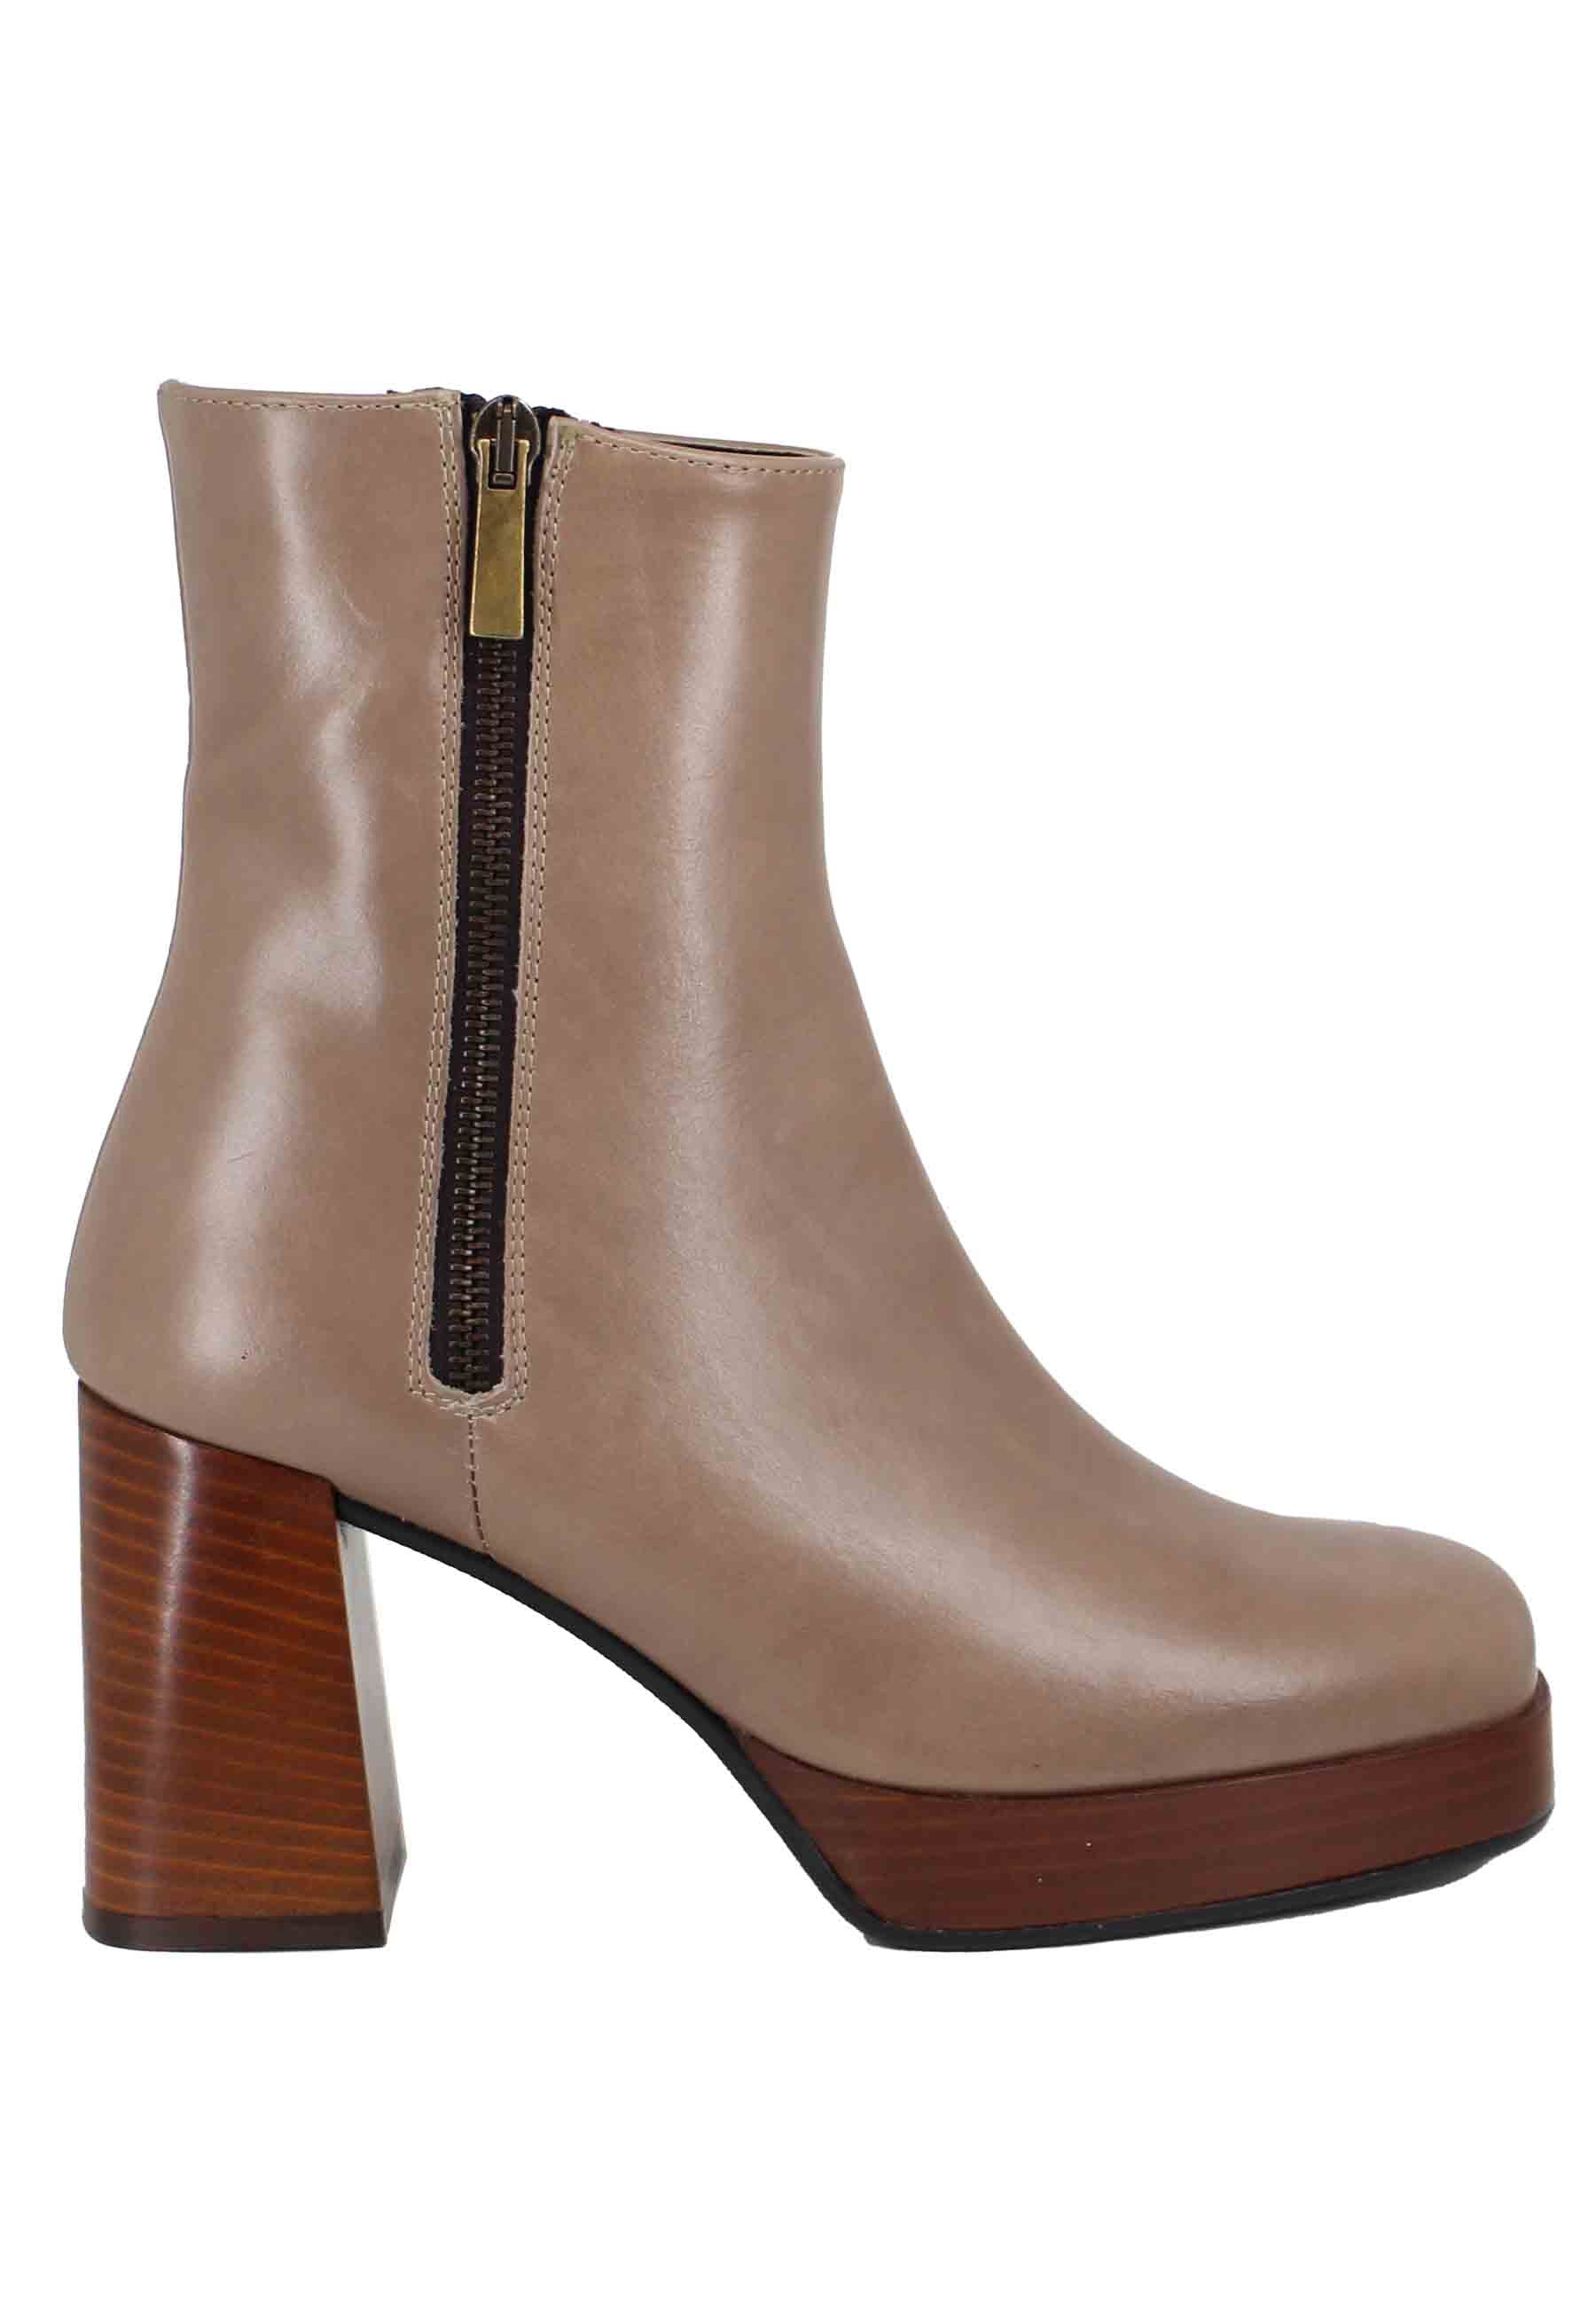 Women's taupe leather ankle boots with high heel and platform with external zip